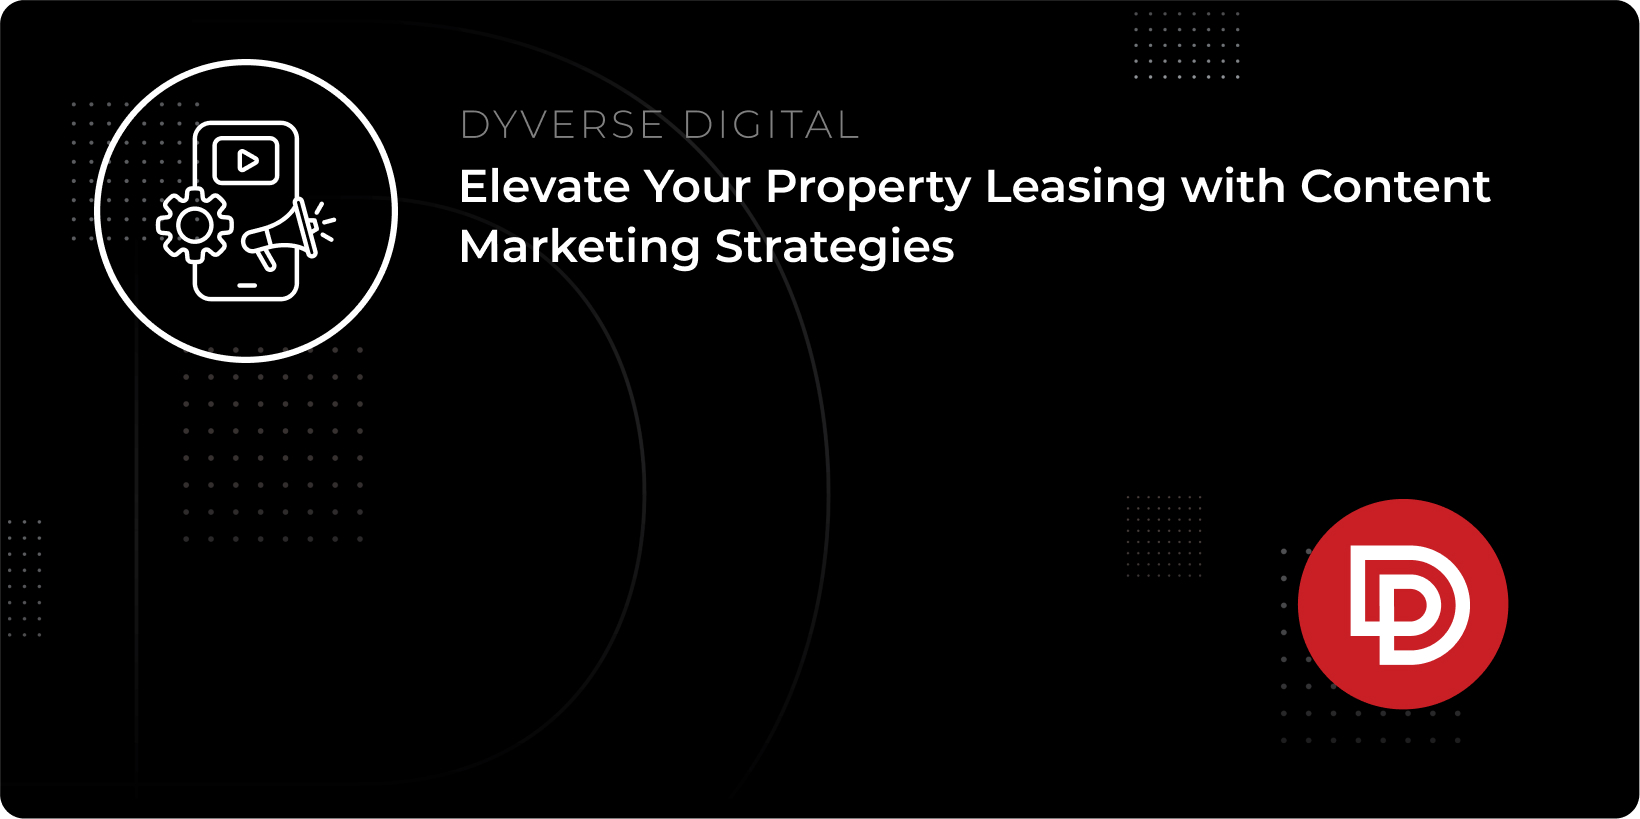 Elevate Your Property Leasing with Content Marketing Strategies